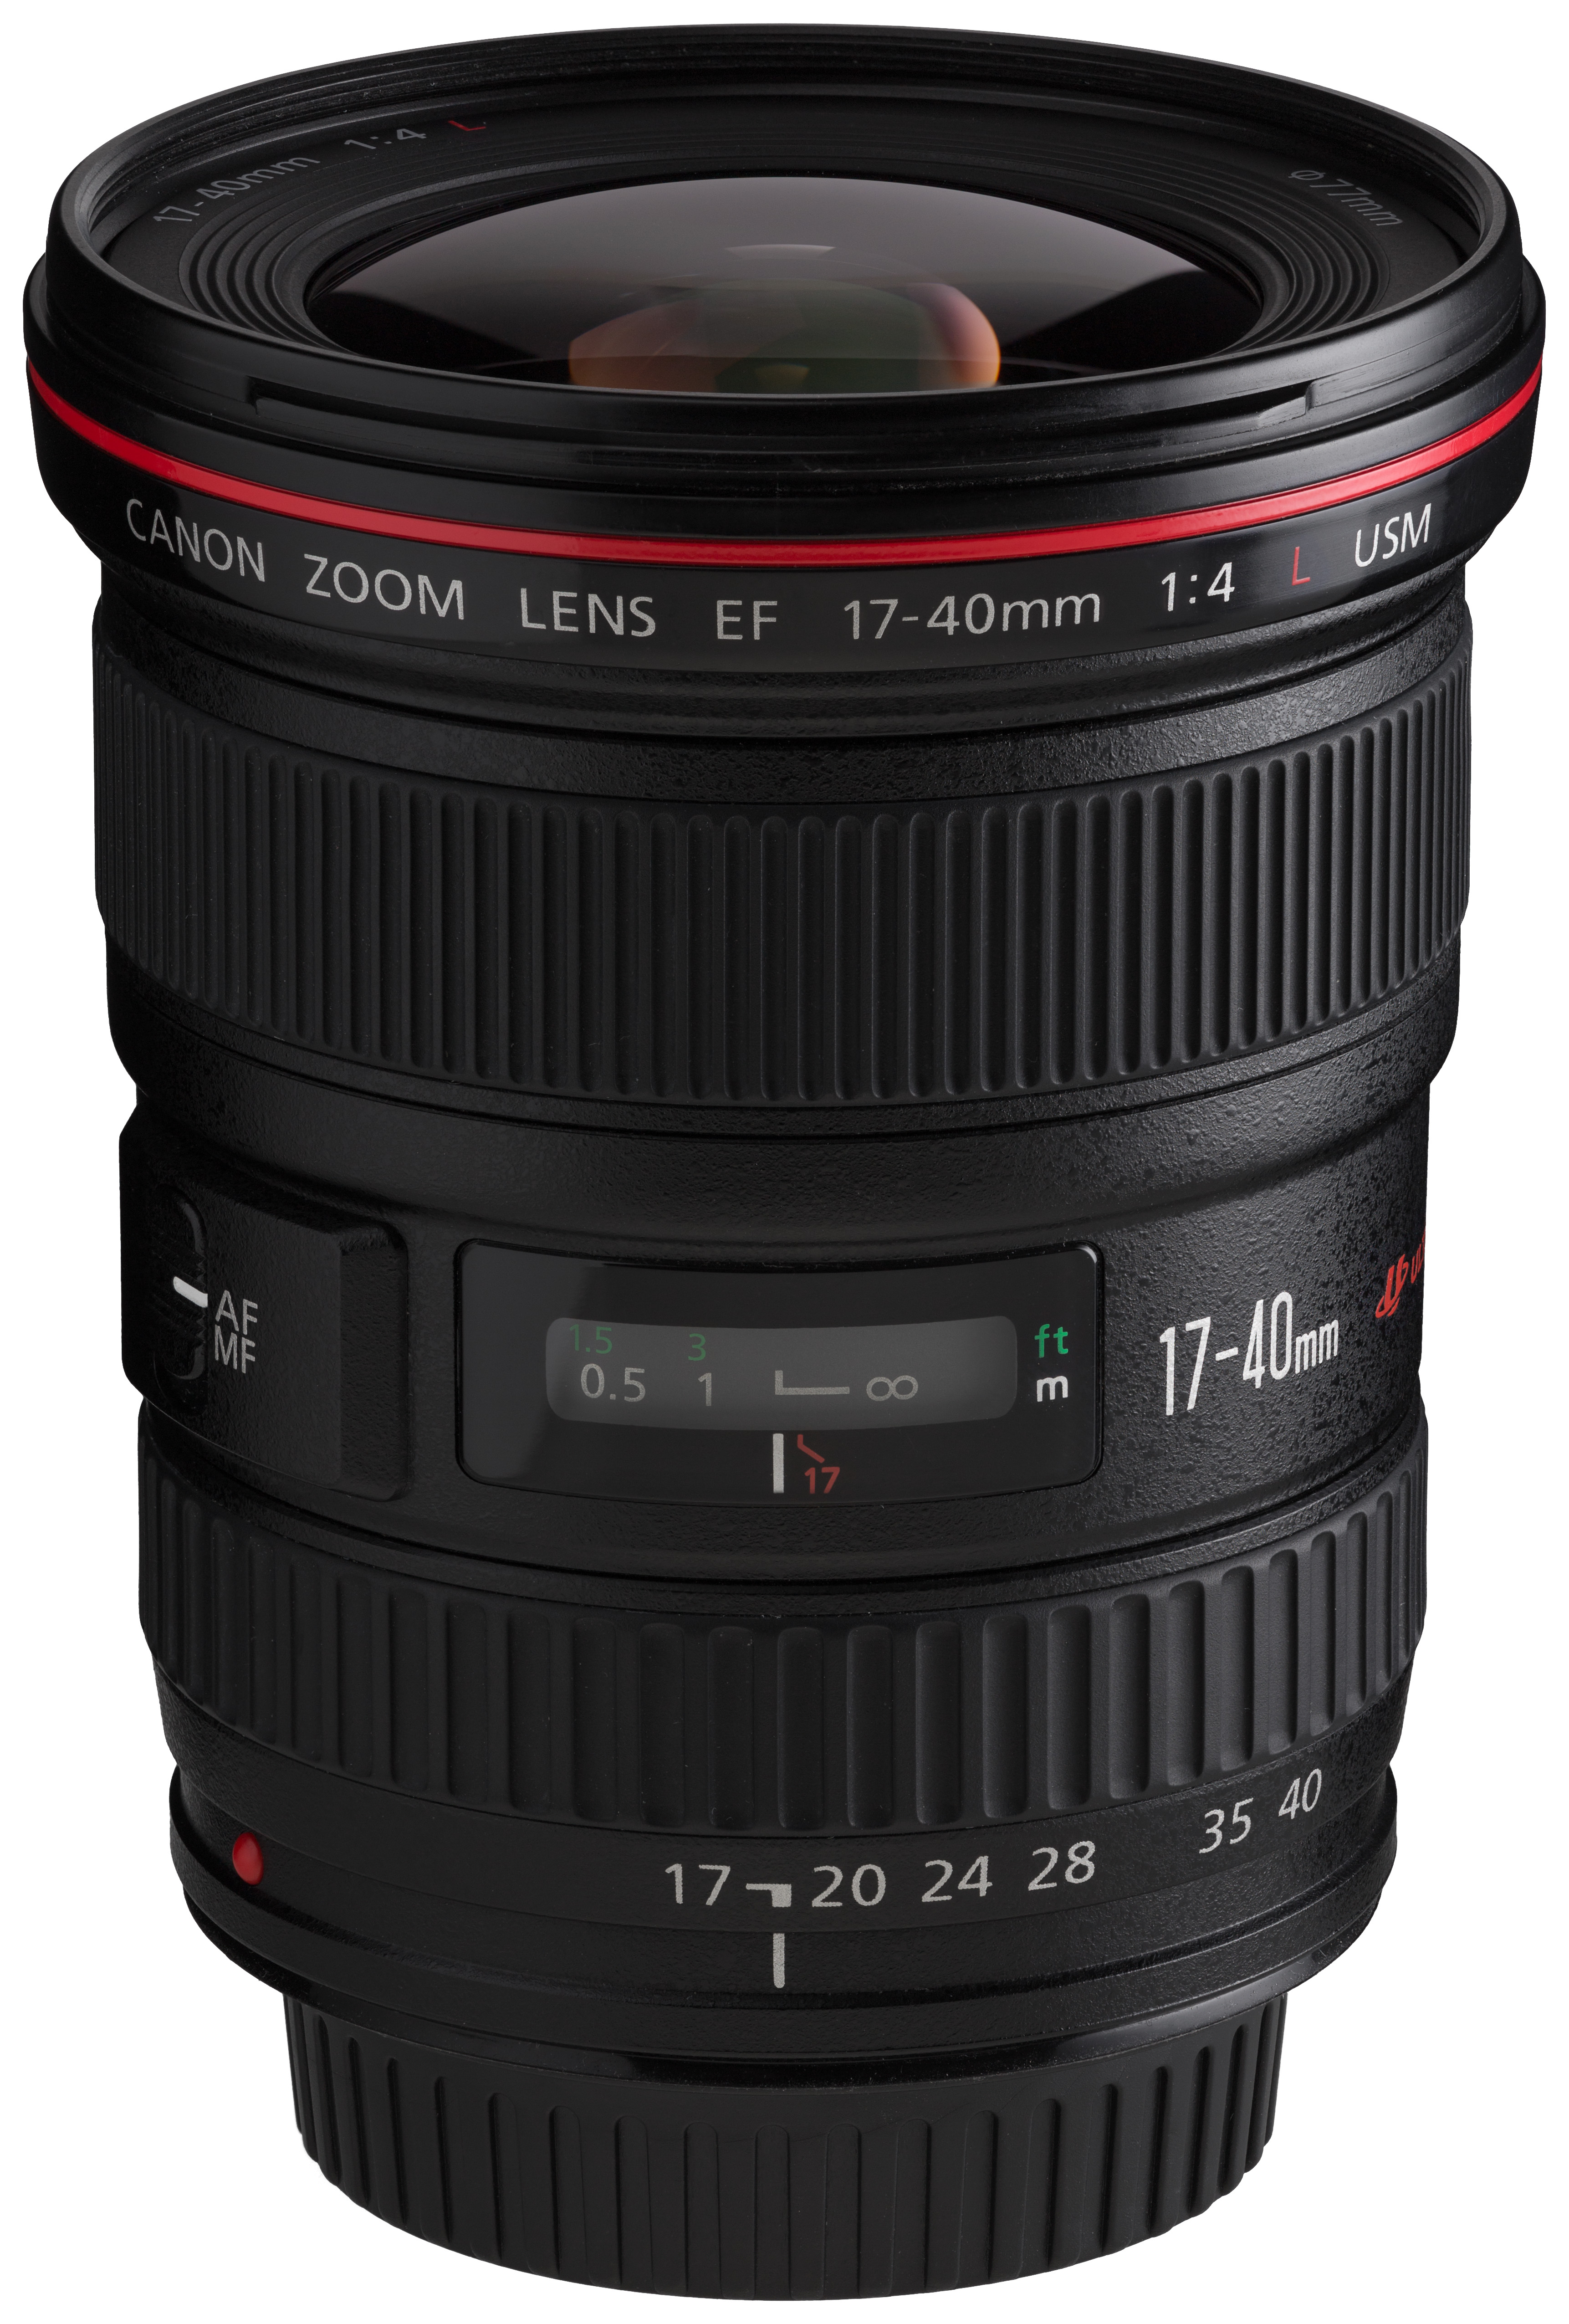 File:Canon EF 17-40mm f4L USM front angled.jpg - Wikimedia Commons